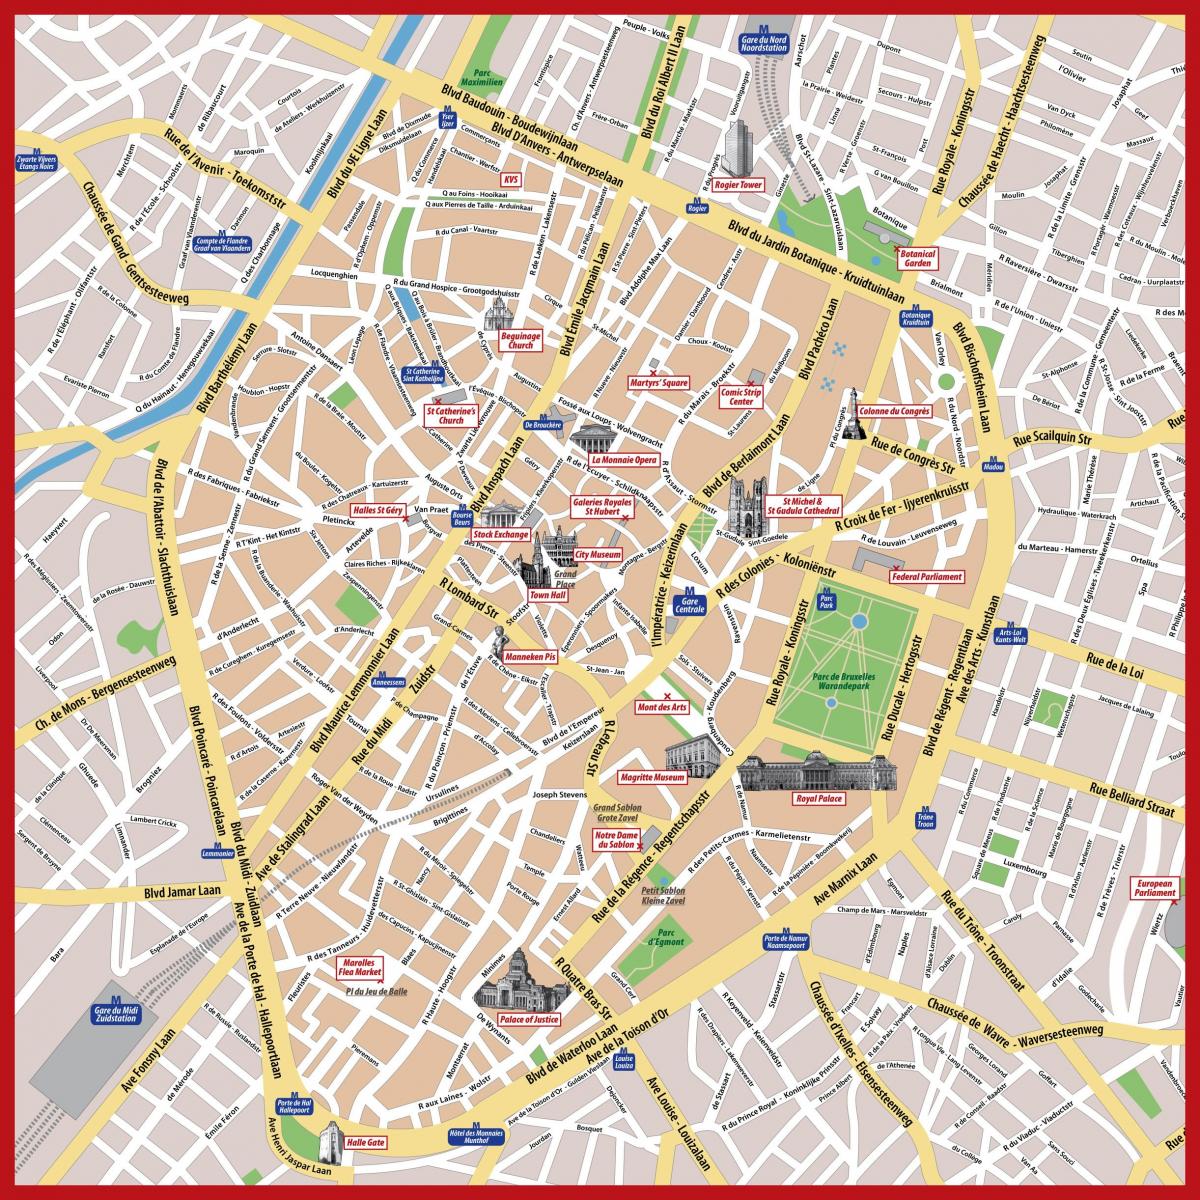 tourism Brussels map